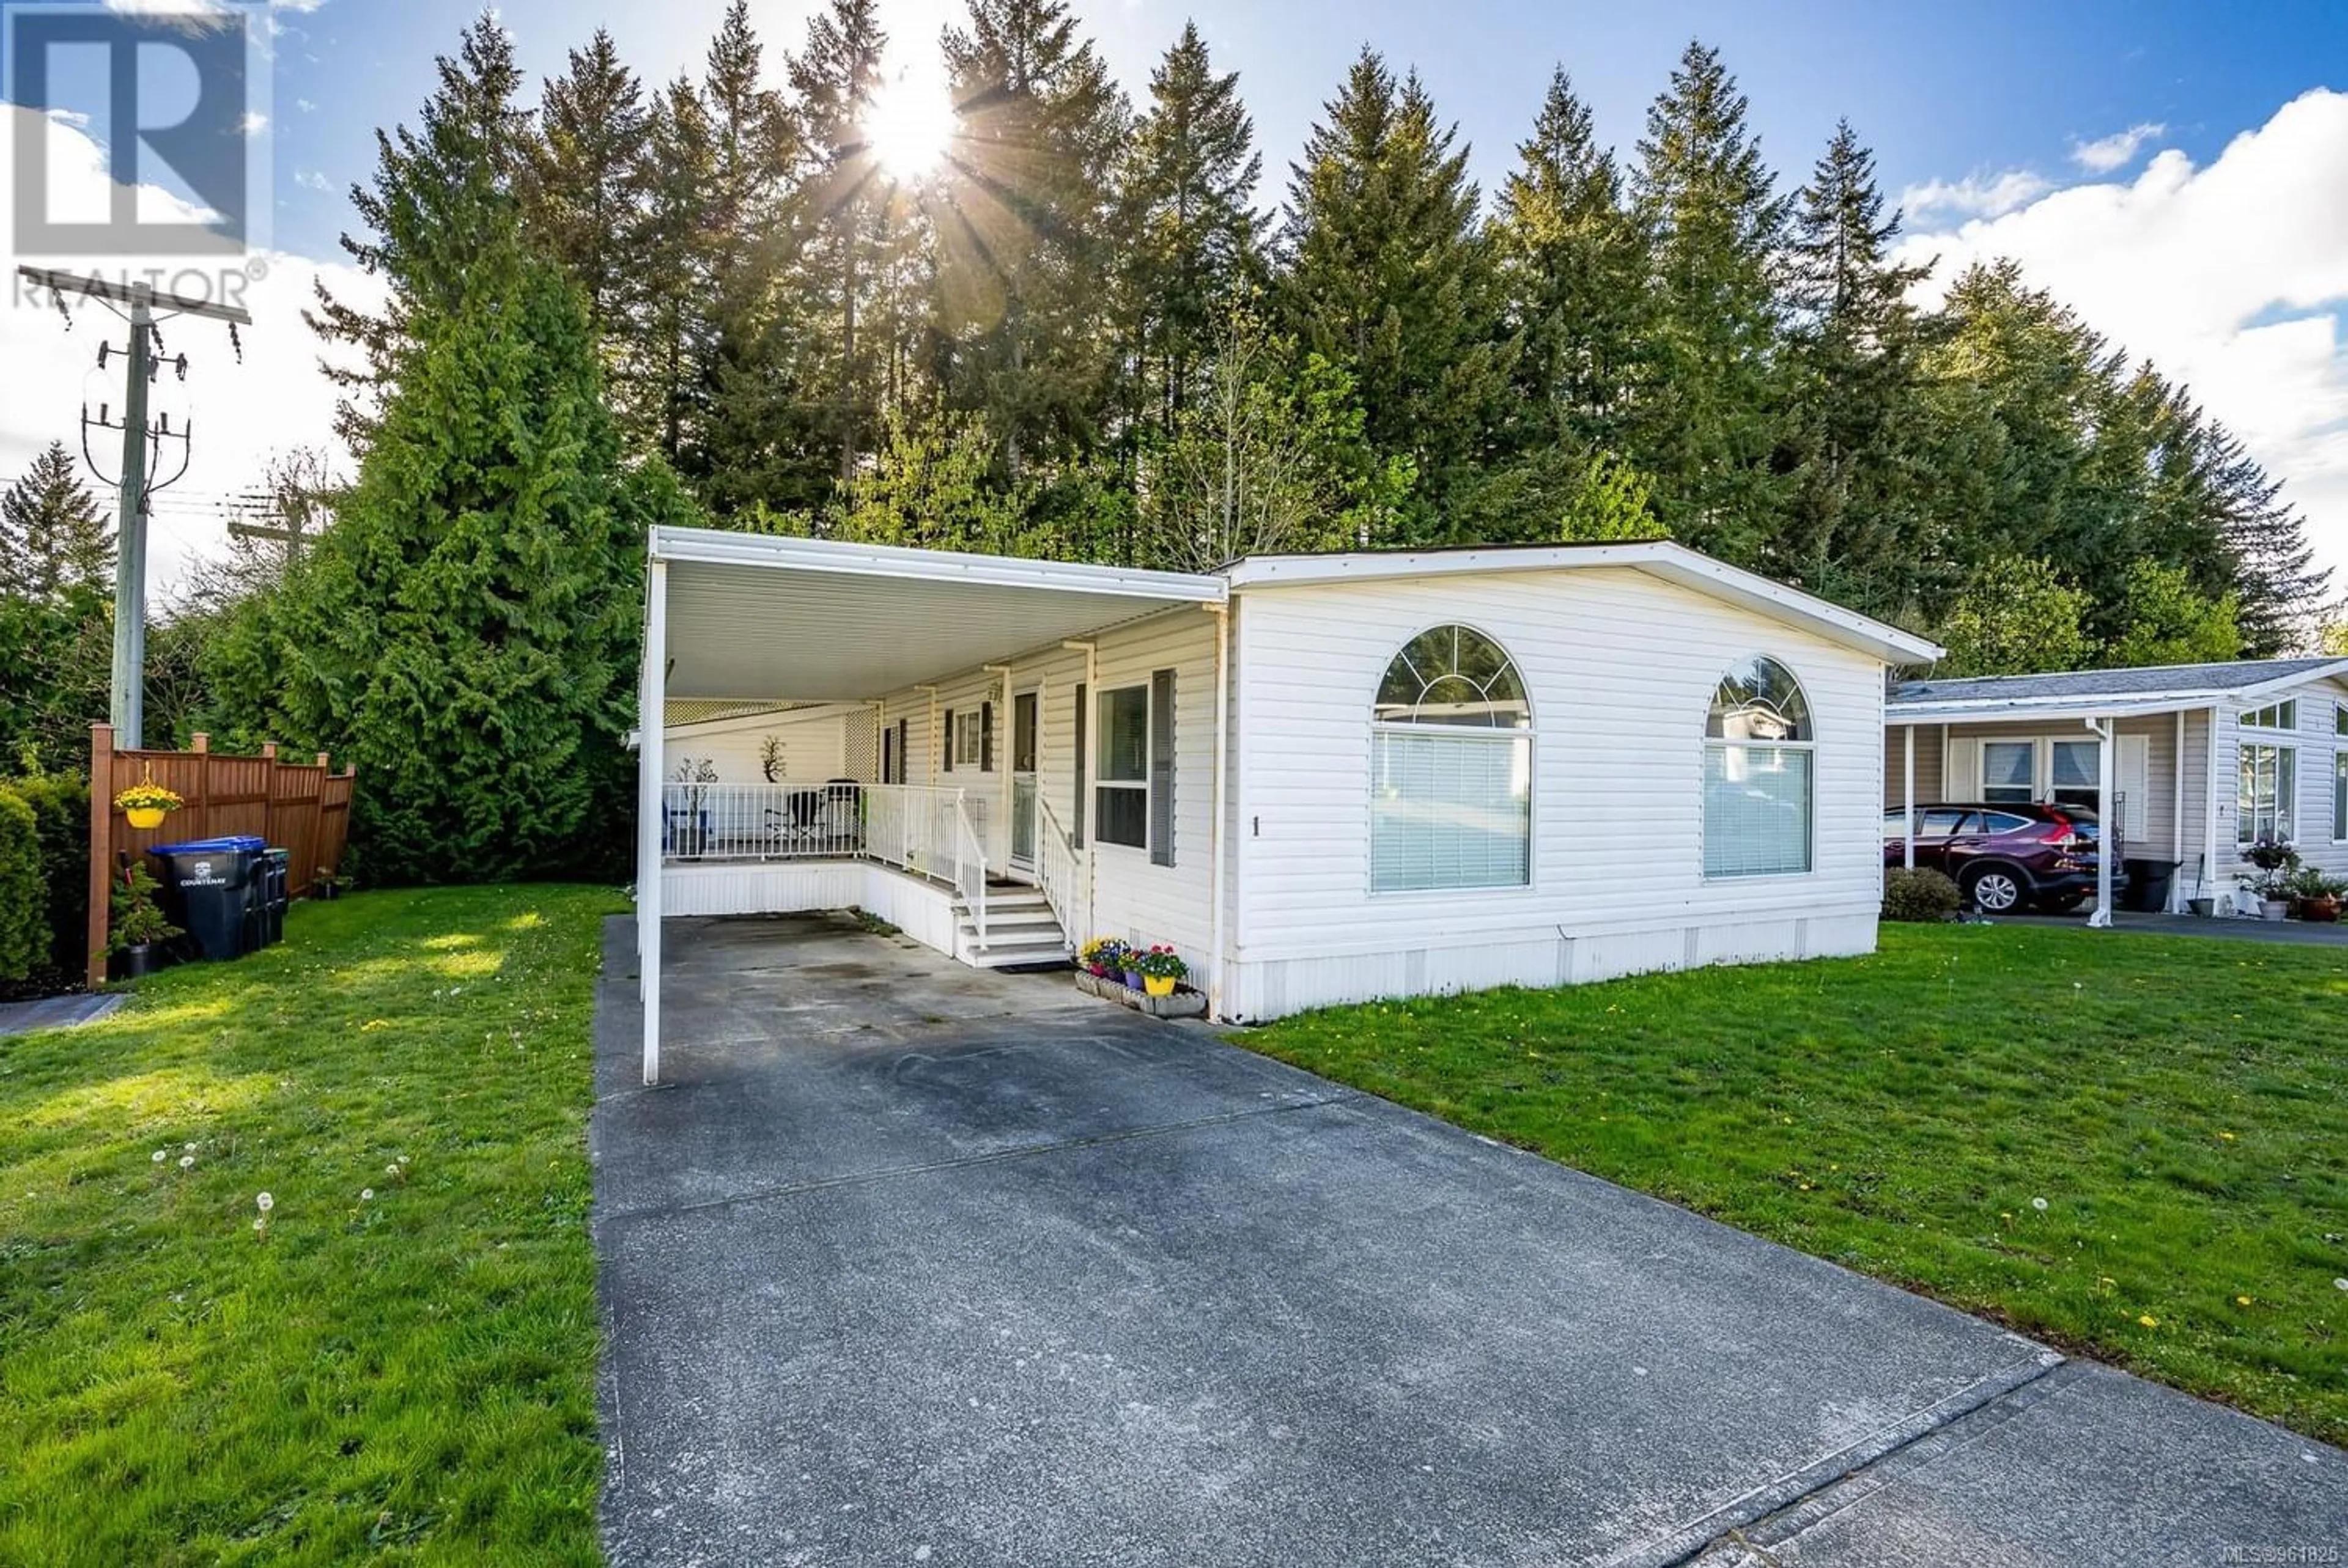 Home with vinyl exterior material for 1 4714 Muir Rd, Courtenay British Columbia V9N8Z6